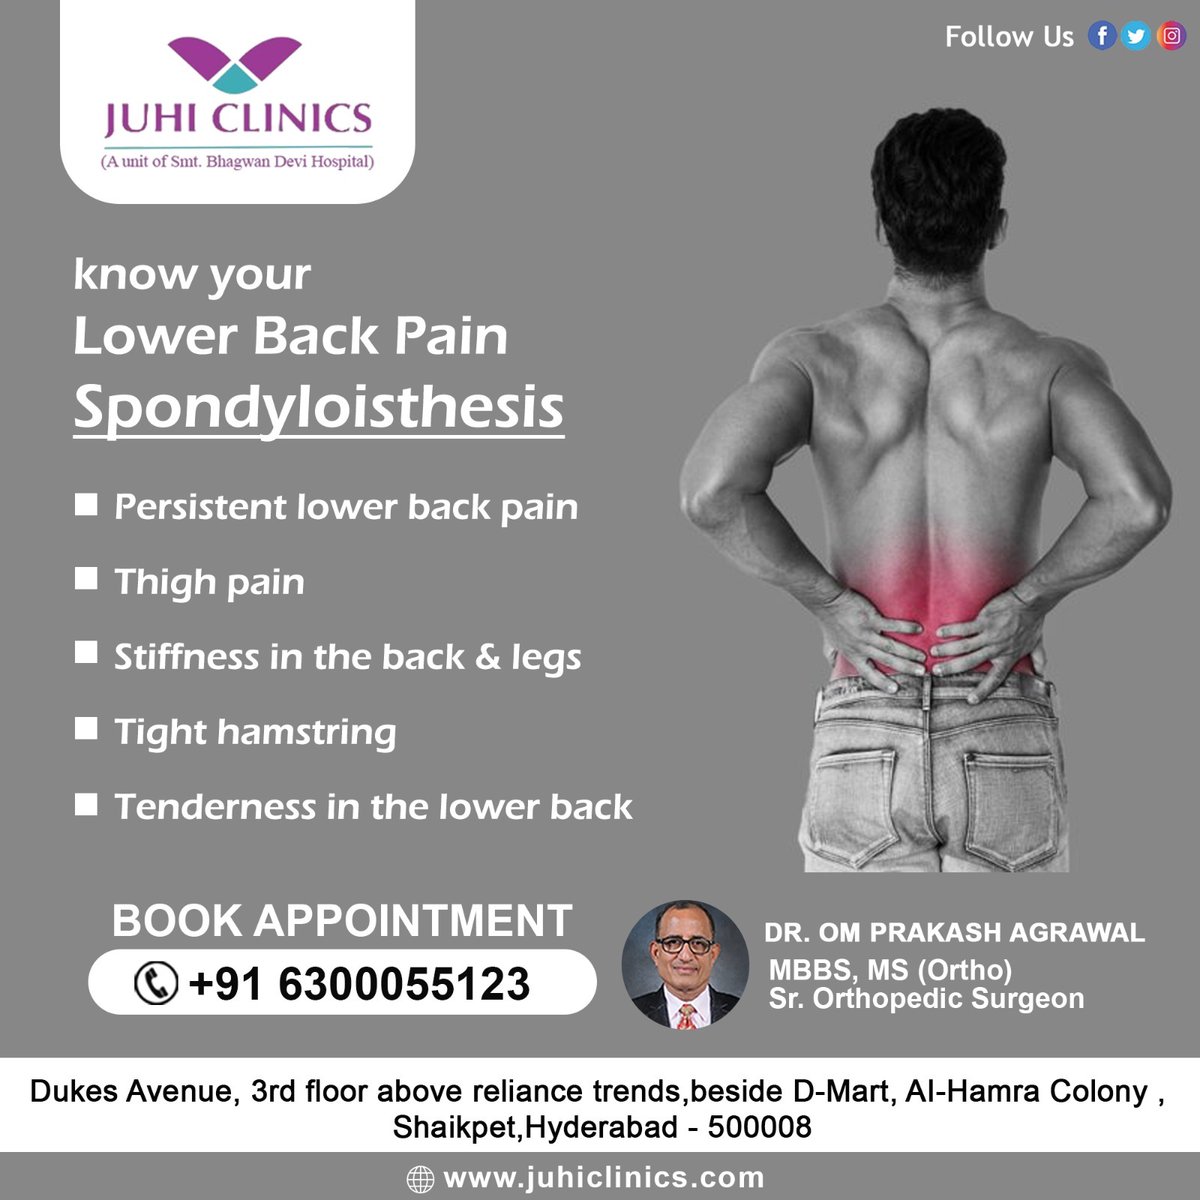 'Alleviate lower #backpain with our #spondylolisthesis solution.
Expert care for #relief and #mobility. 
Say goodbye to discomfort!'

#juhi #juhiclinics #dromprakashagrawal #orthopedic #orthopedicdoctor #orthopedicdoctorinhyderabad #orthopedicsurgeon #orthopedicdoctorinshaikpet